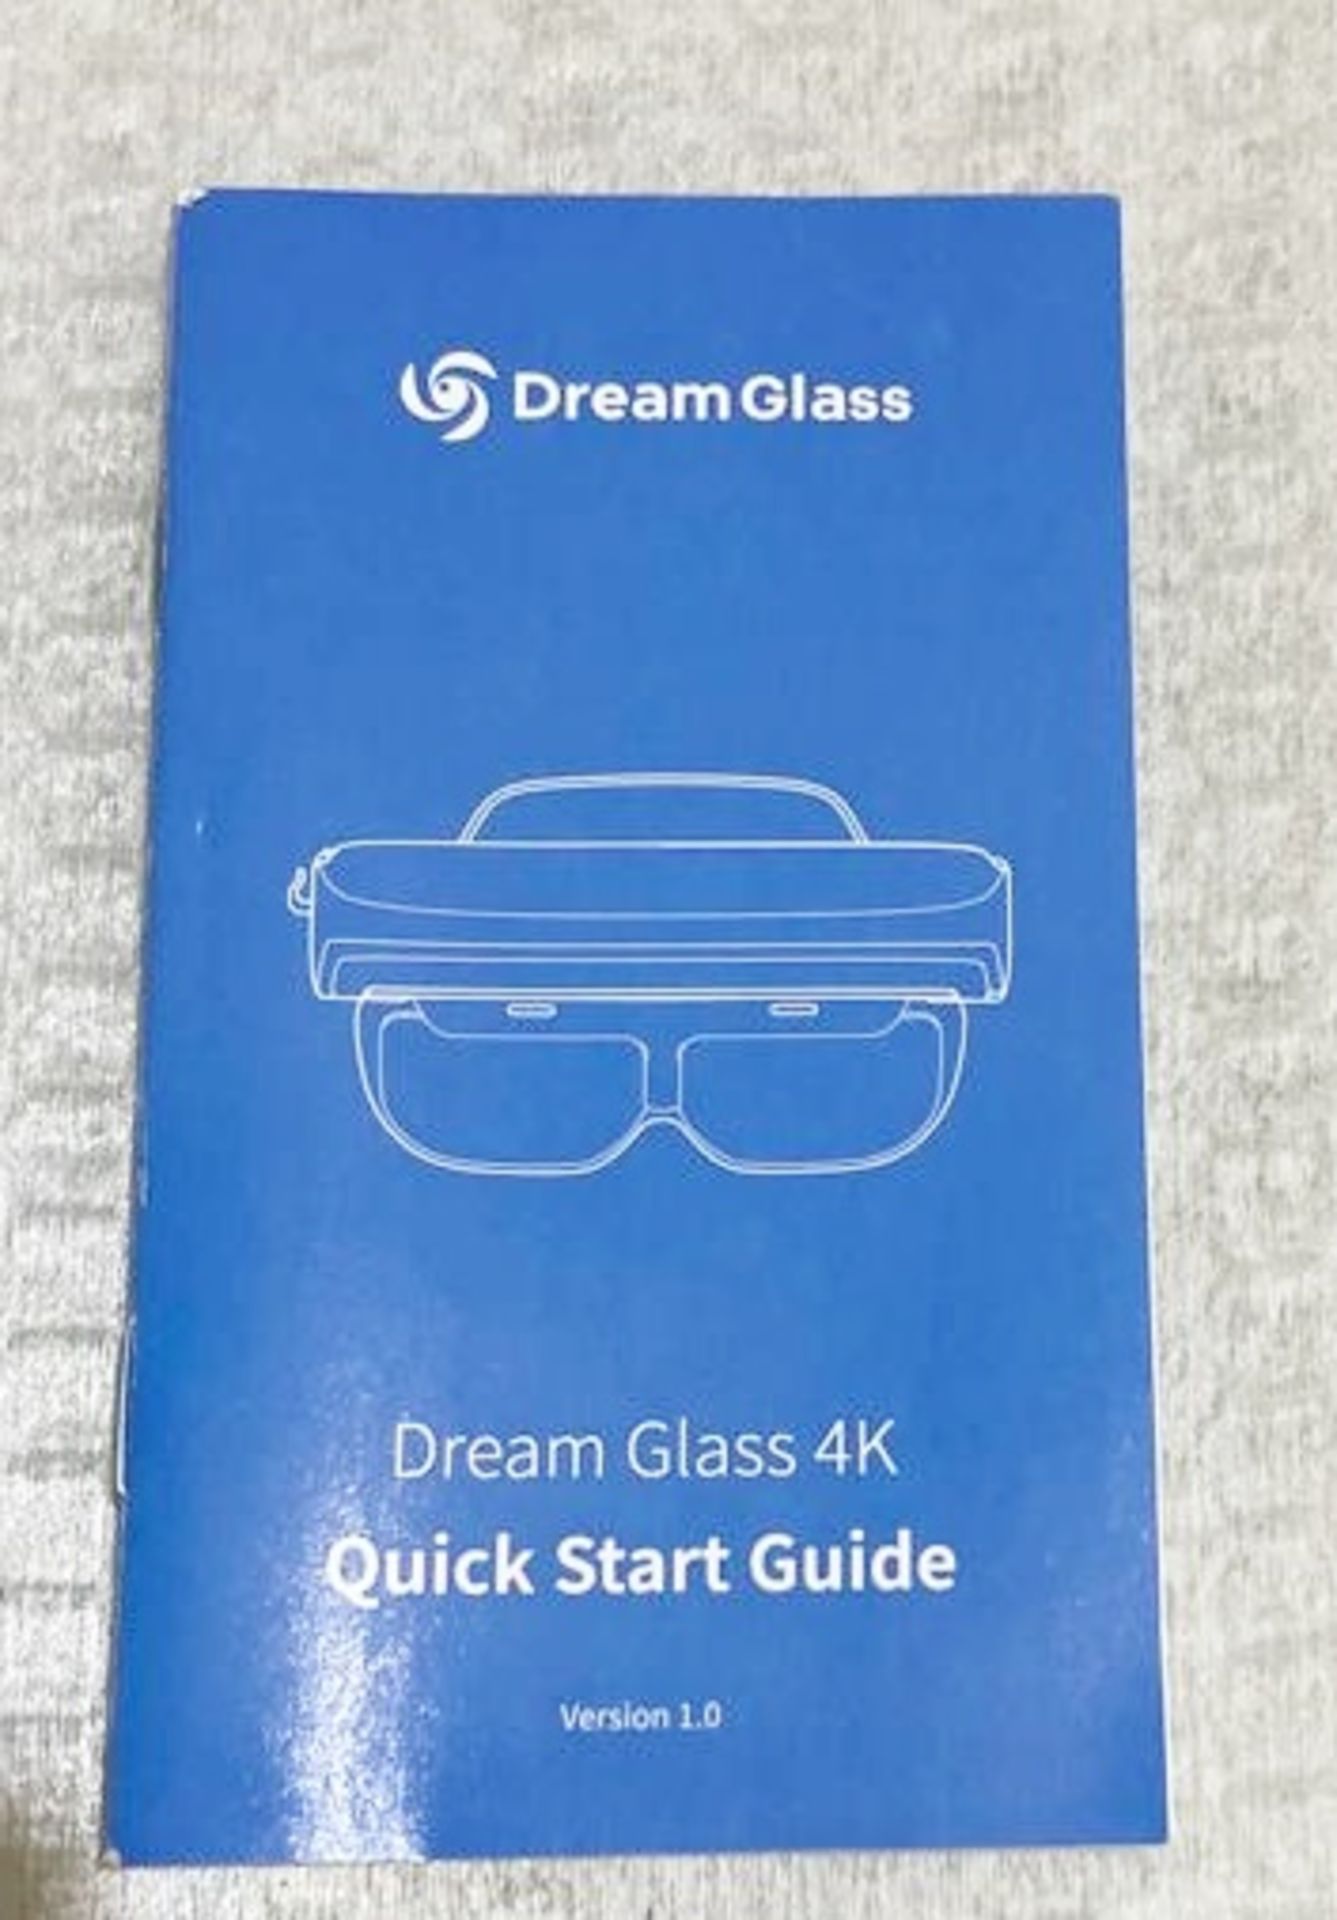 1 x Dream Glass 4k Portable And Private AR Smart Glasses - Original RRP £588.00 - CL712 - Ref: - Image 8 of 11